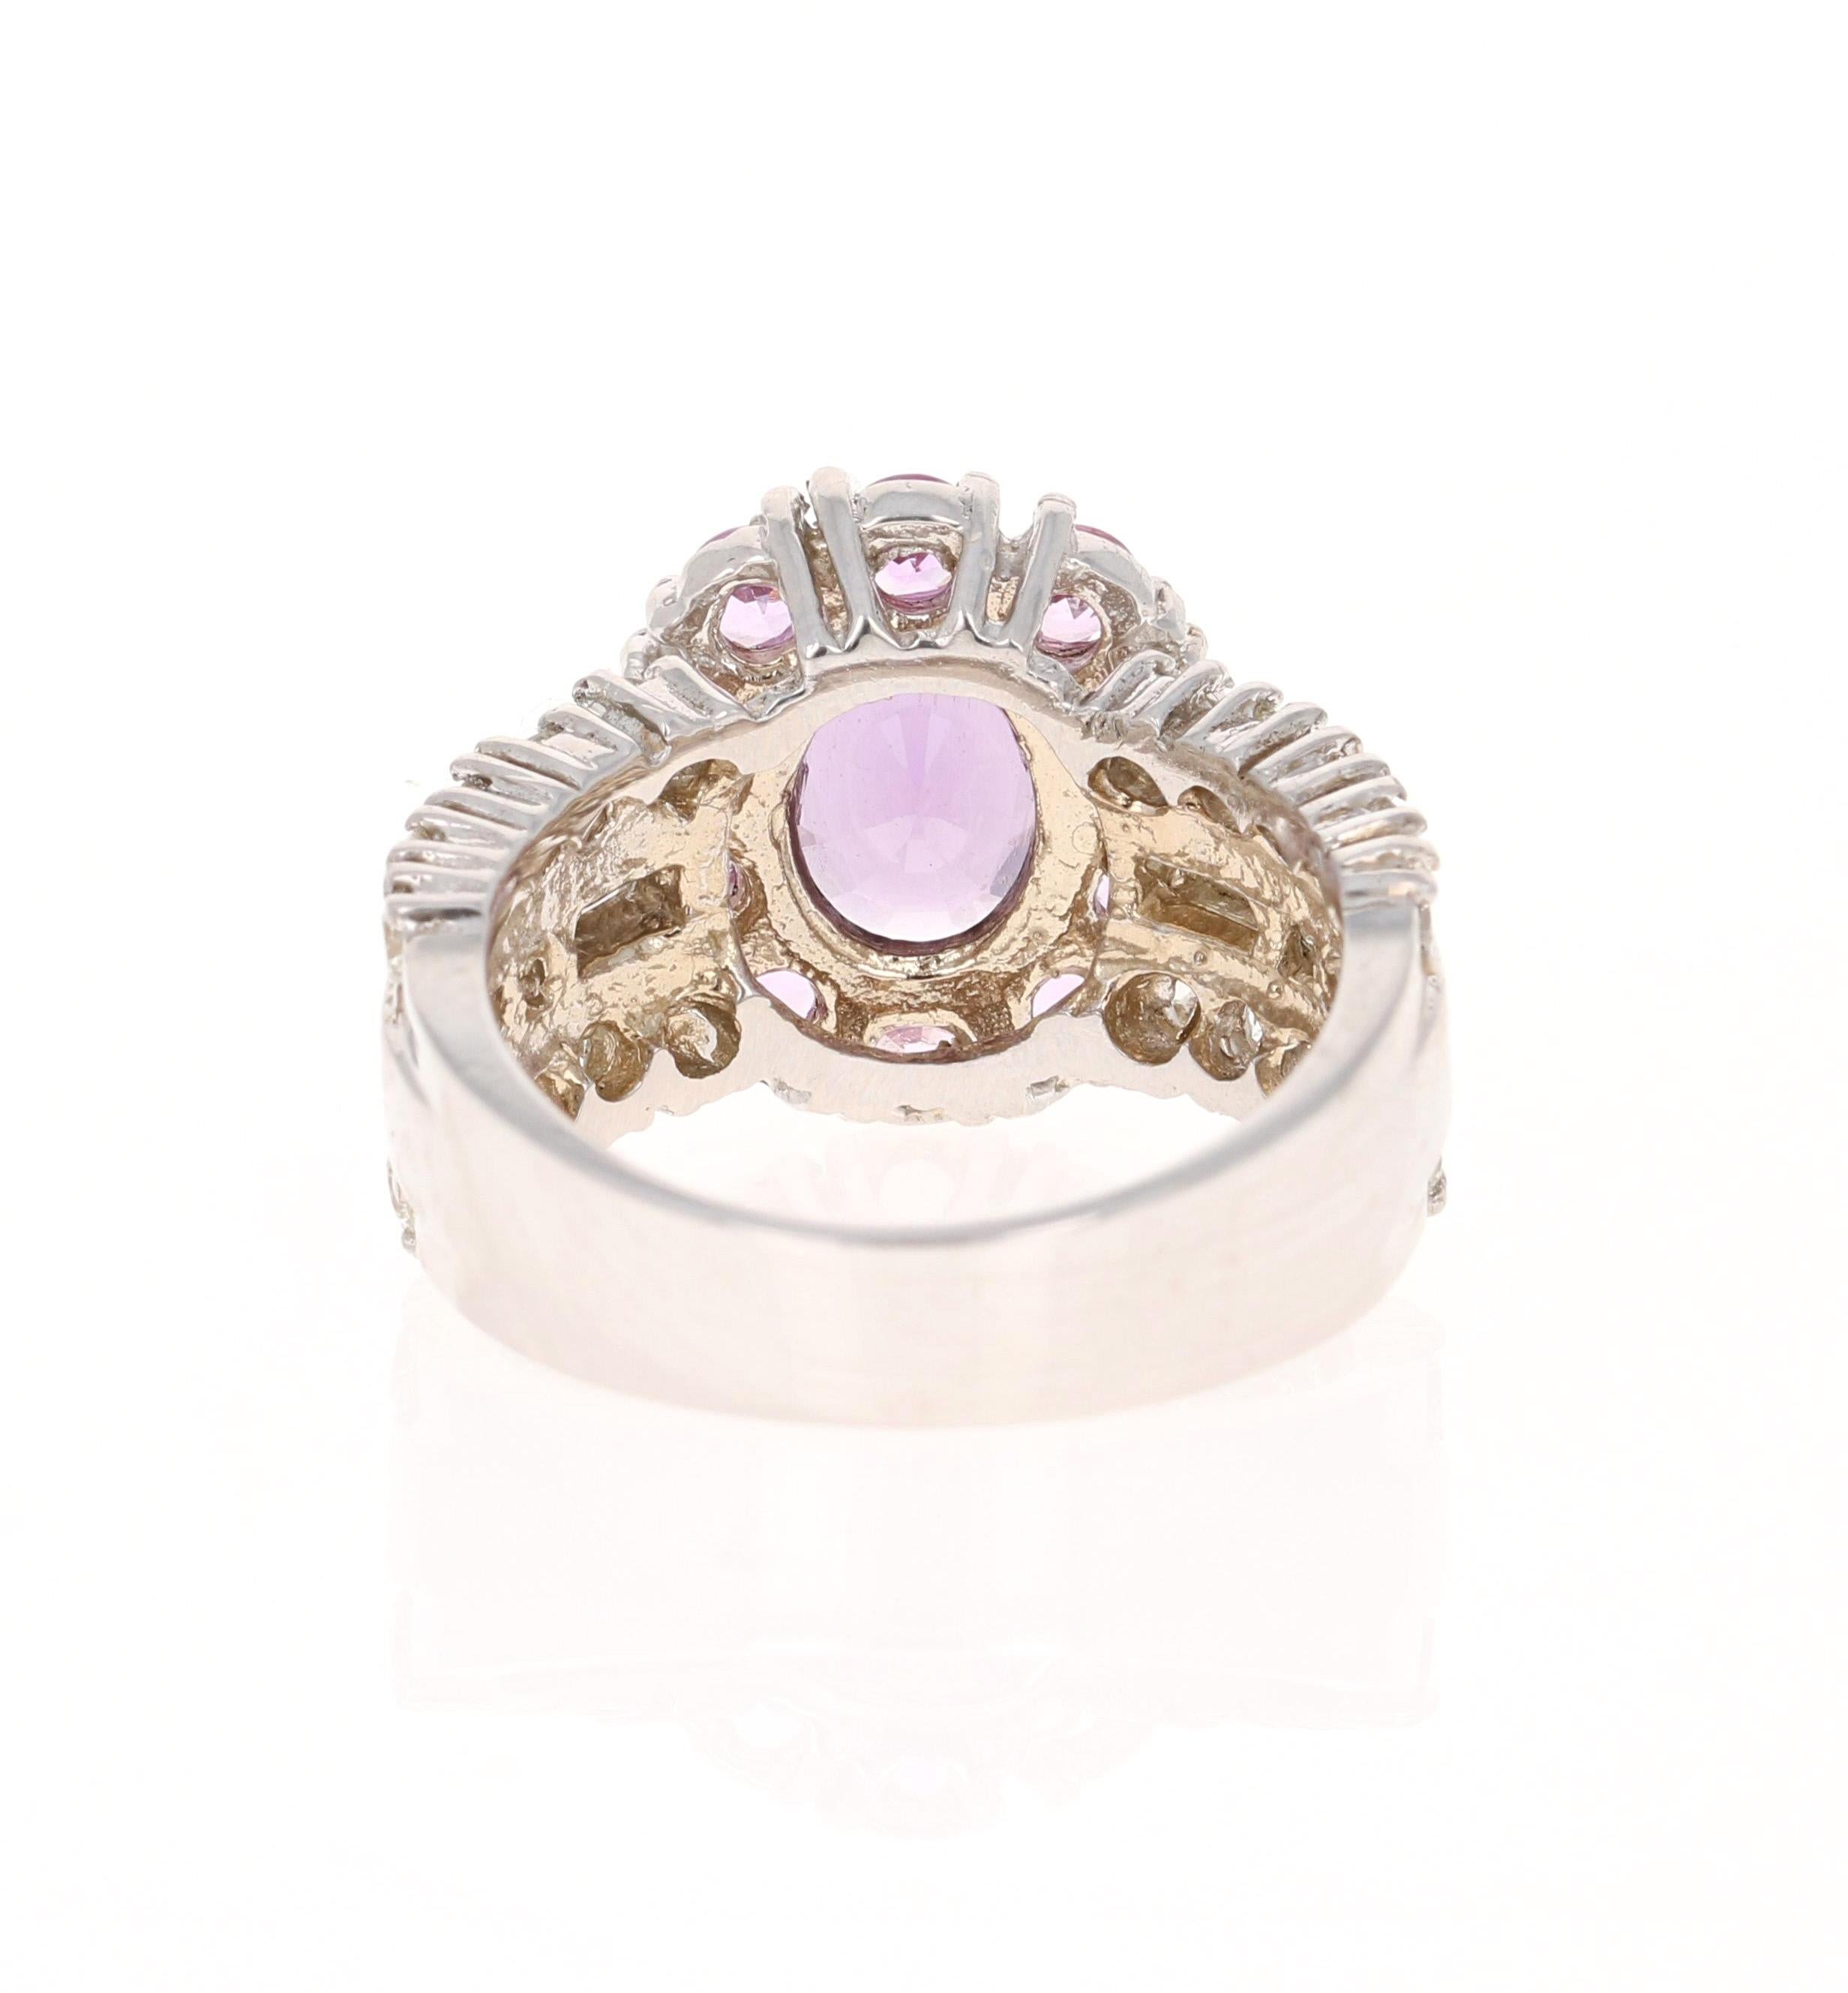 GIA Certified 3.99 Carat Pink Purple Sapphire Diamond 18 Karat White Gold Ring In New Condition For Sale In Los Angeles, CA